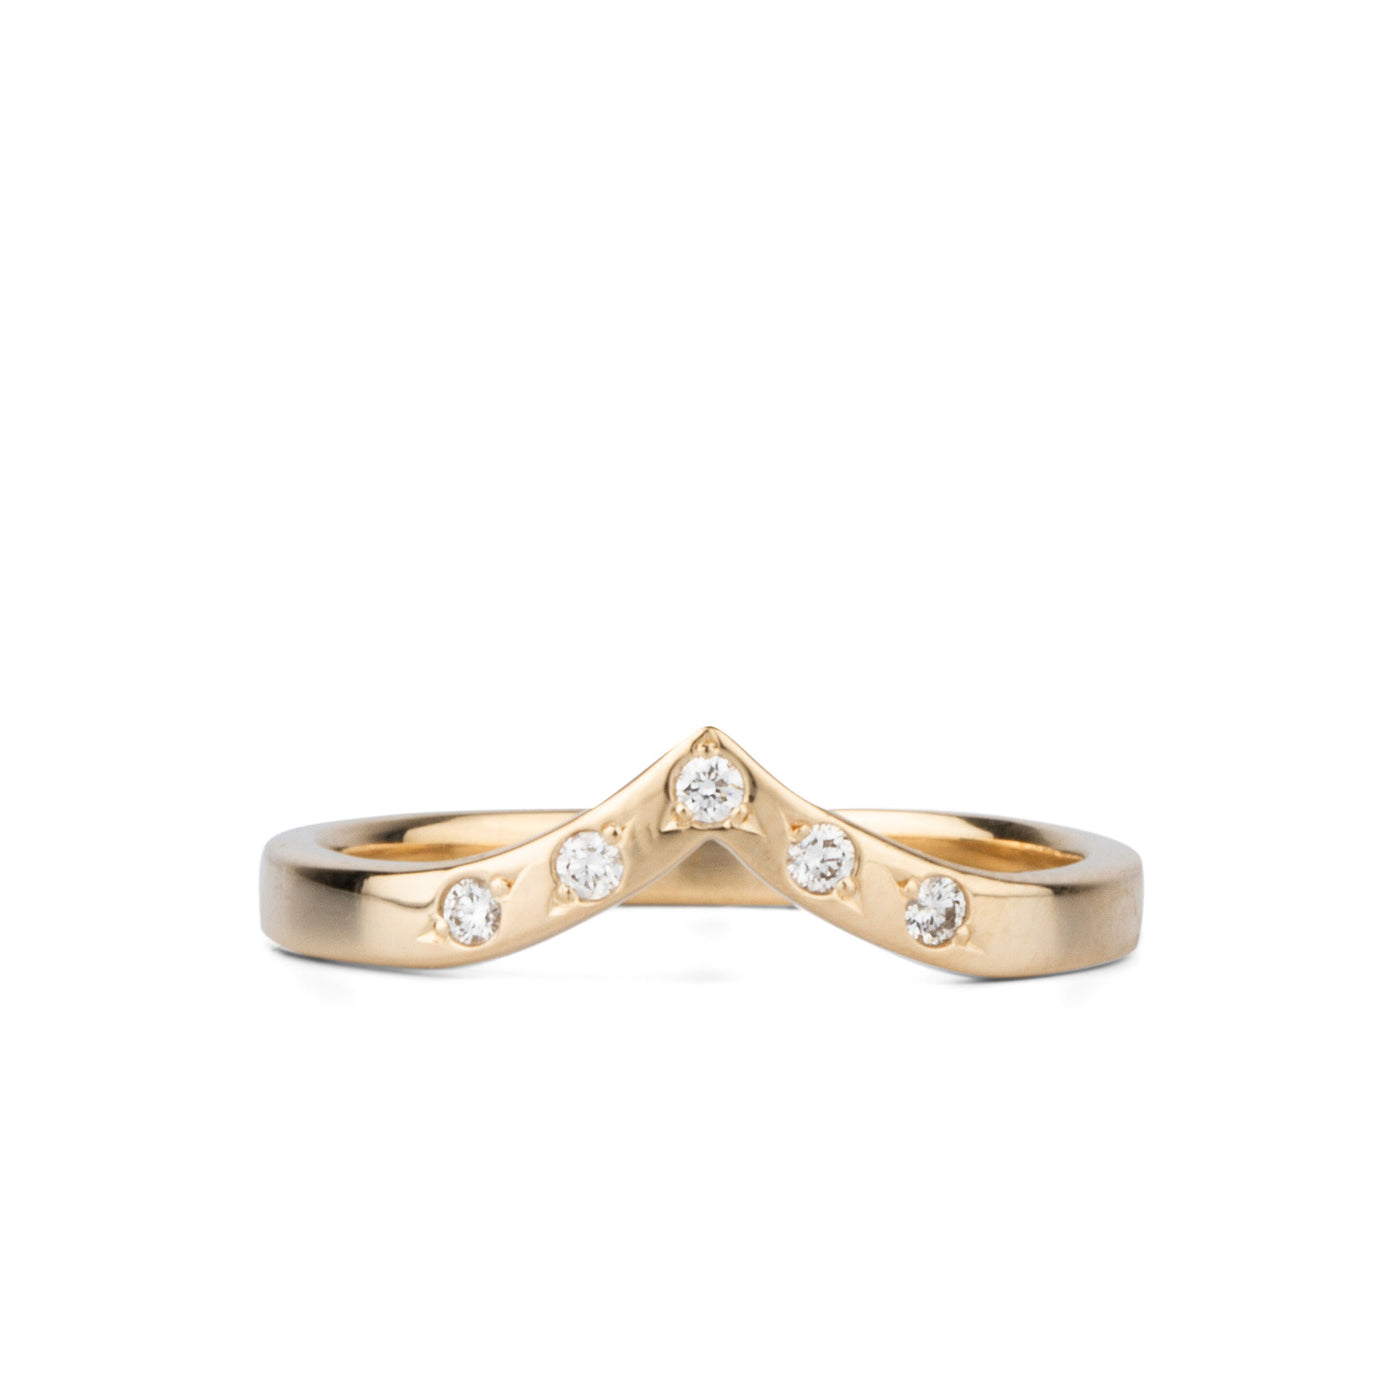 Peaked 14k yellow gold band with five white diamonds in delicate star settings on a white background